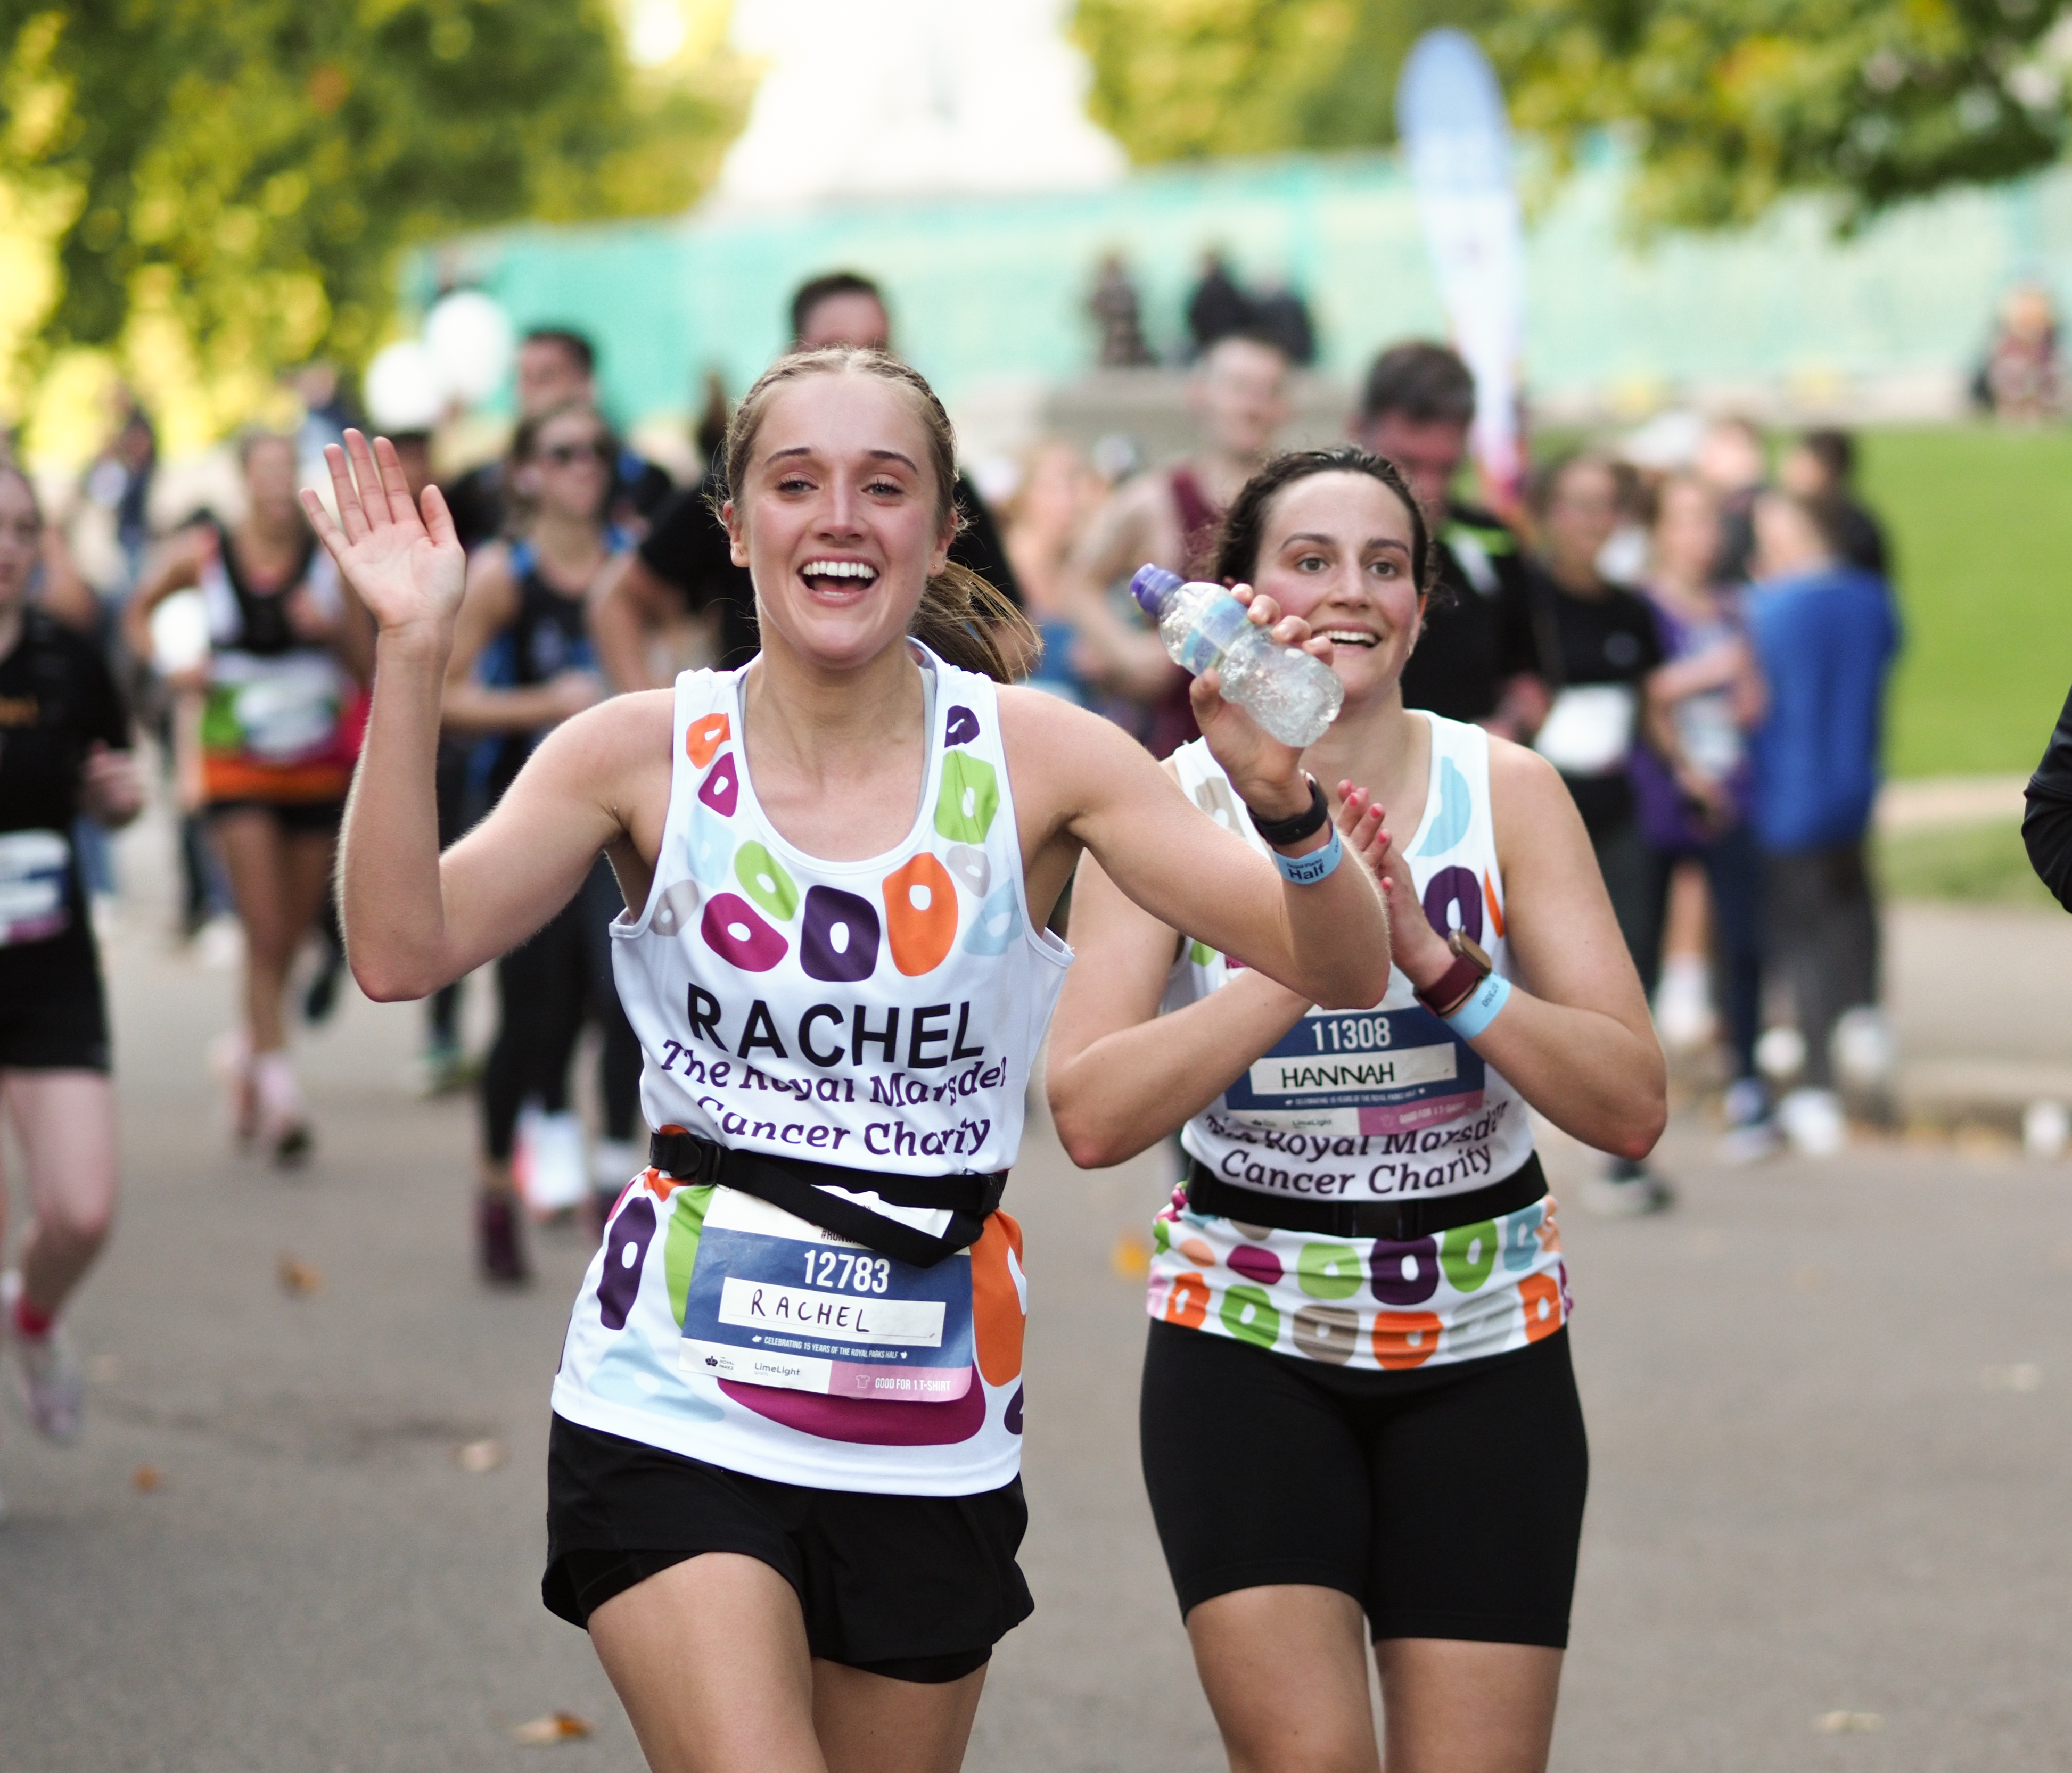 Two Team Marsden runners taking part in the Royal Parks Half Marathon 2022, waving at the camera.